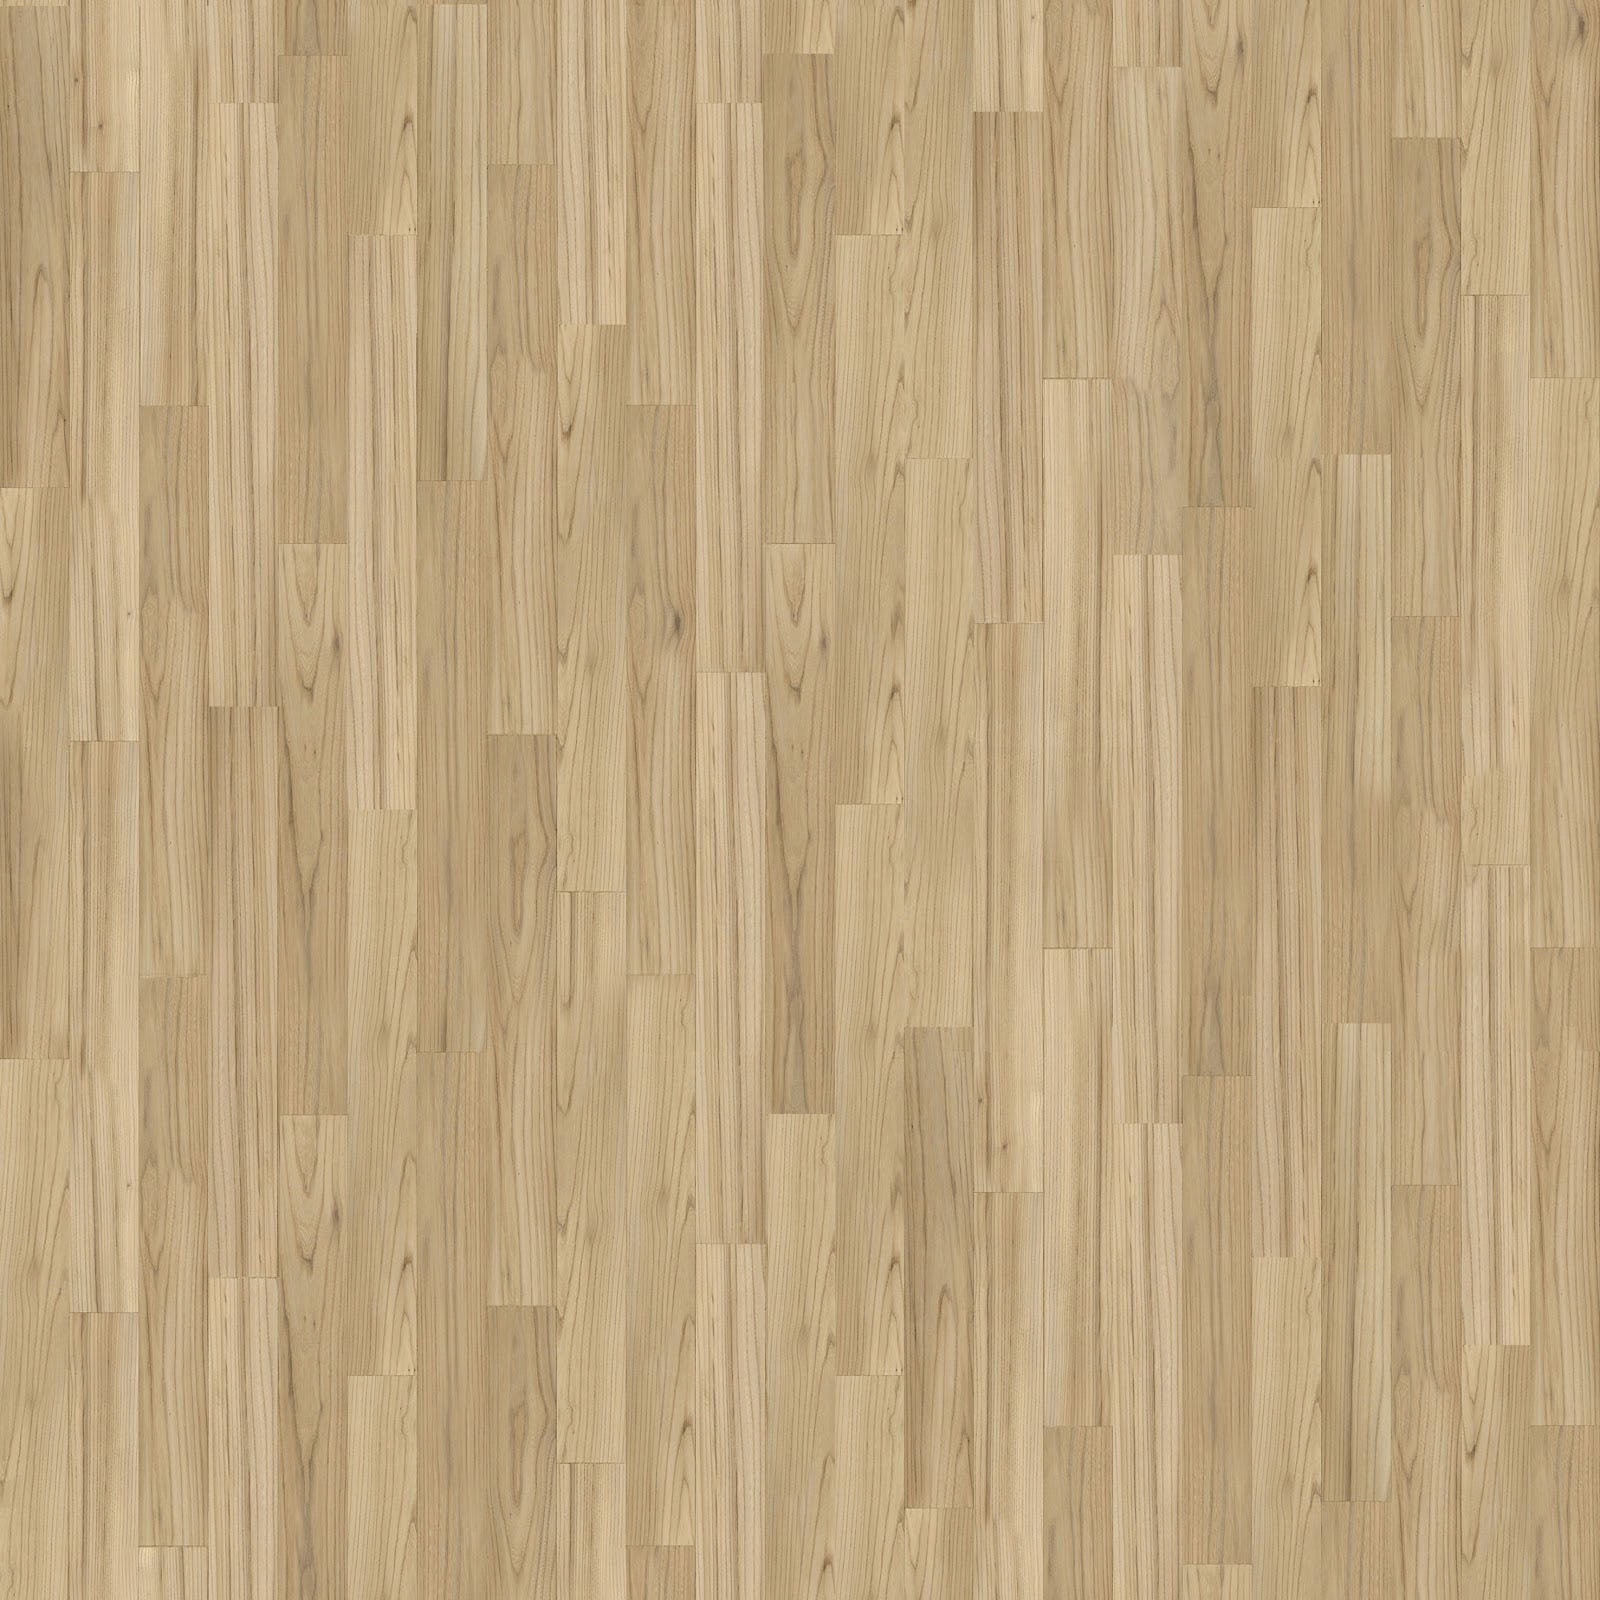 seamless_texture_rovere_wood_parquet_DIFFUSE